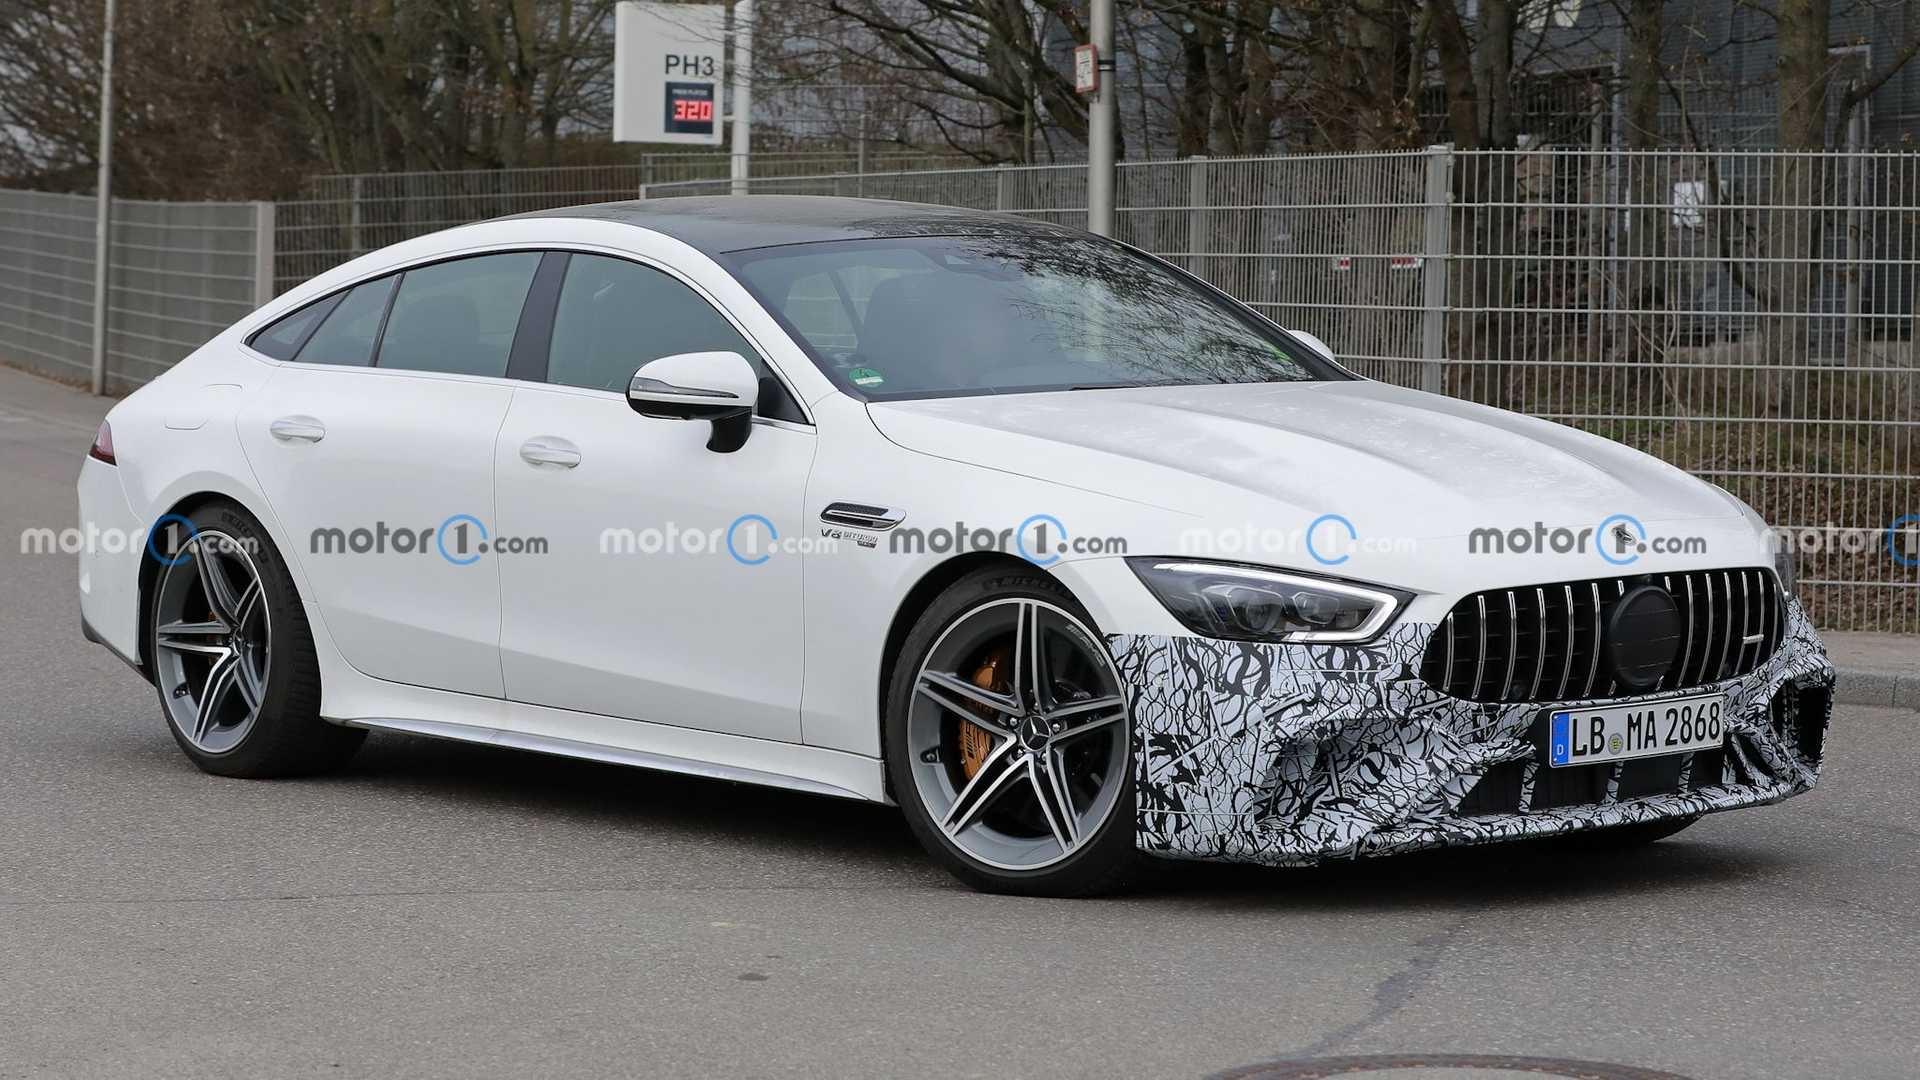 Nuova Mercedes-AMG GT 63 S foto spia restyling